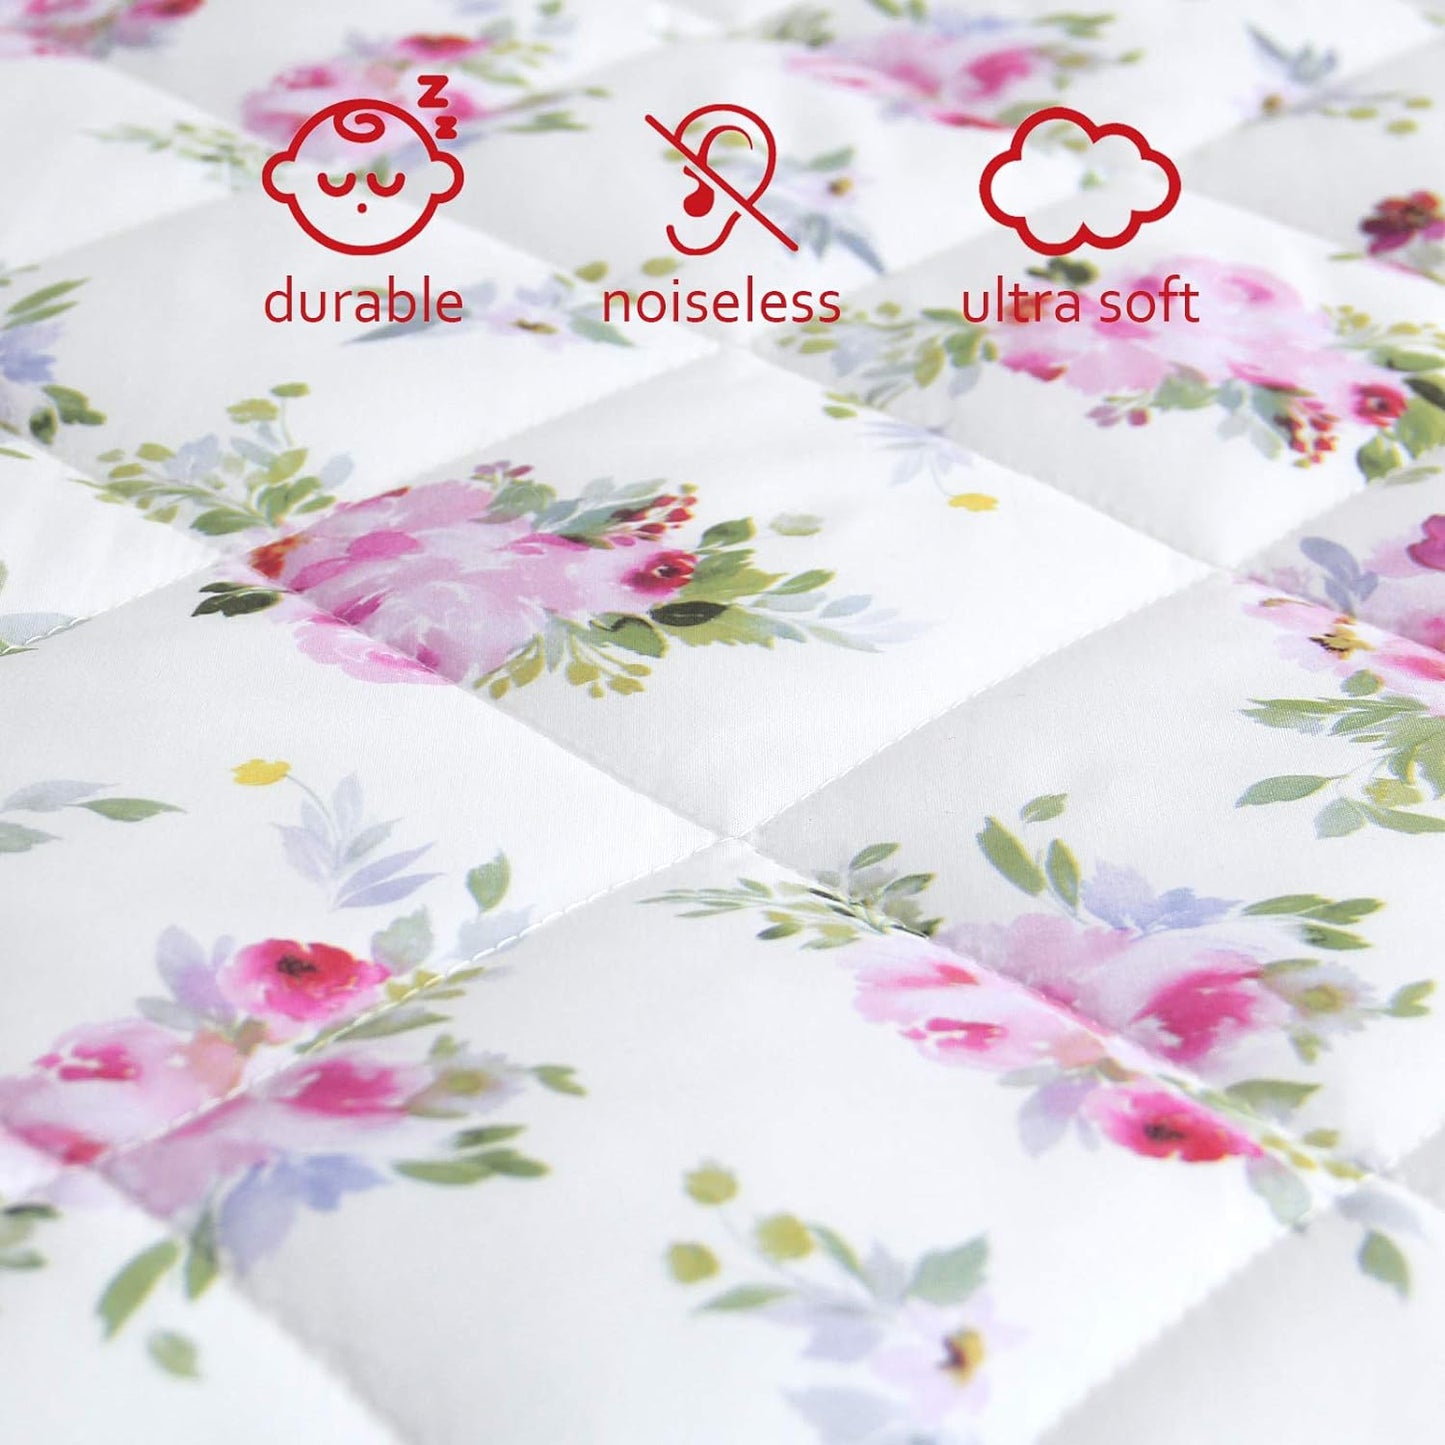 Pack n Play Sheet Quilted | Mini Crib Sheet - Pack and Play Mattress Pad Cover, Ultra-Soft Microfiber, Fits Graco Pack and Play, Floral